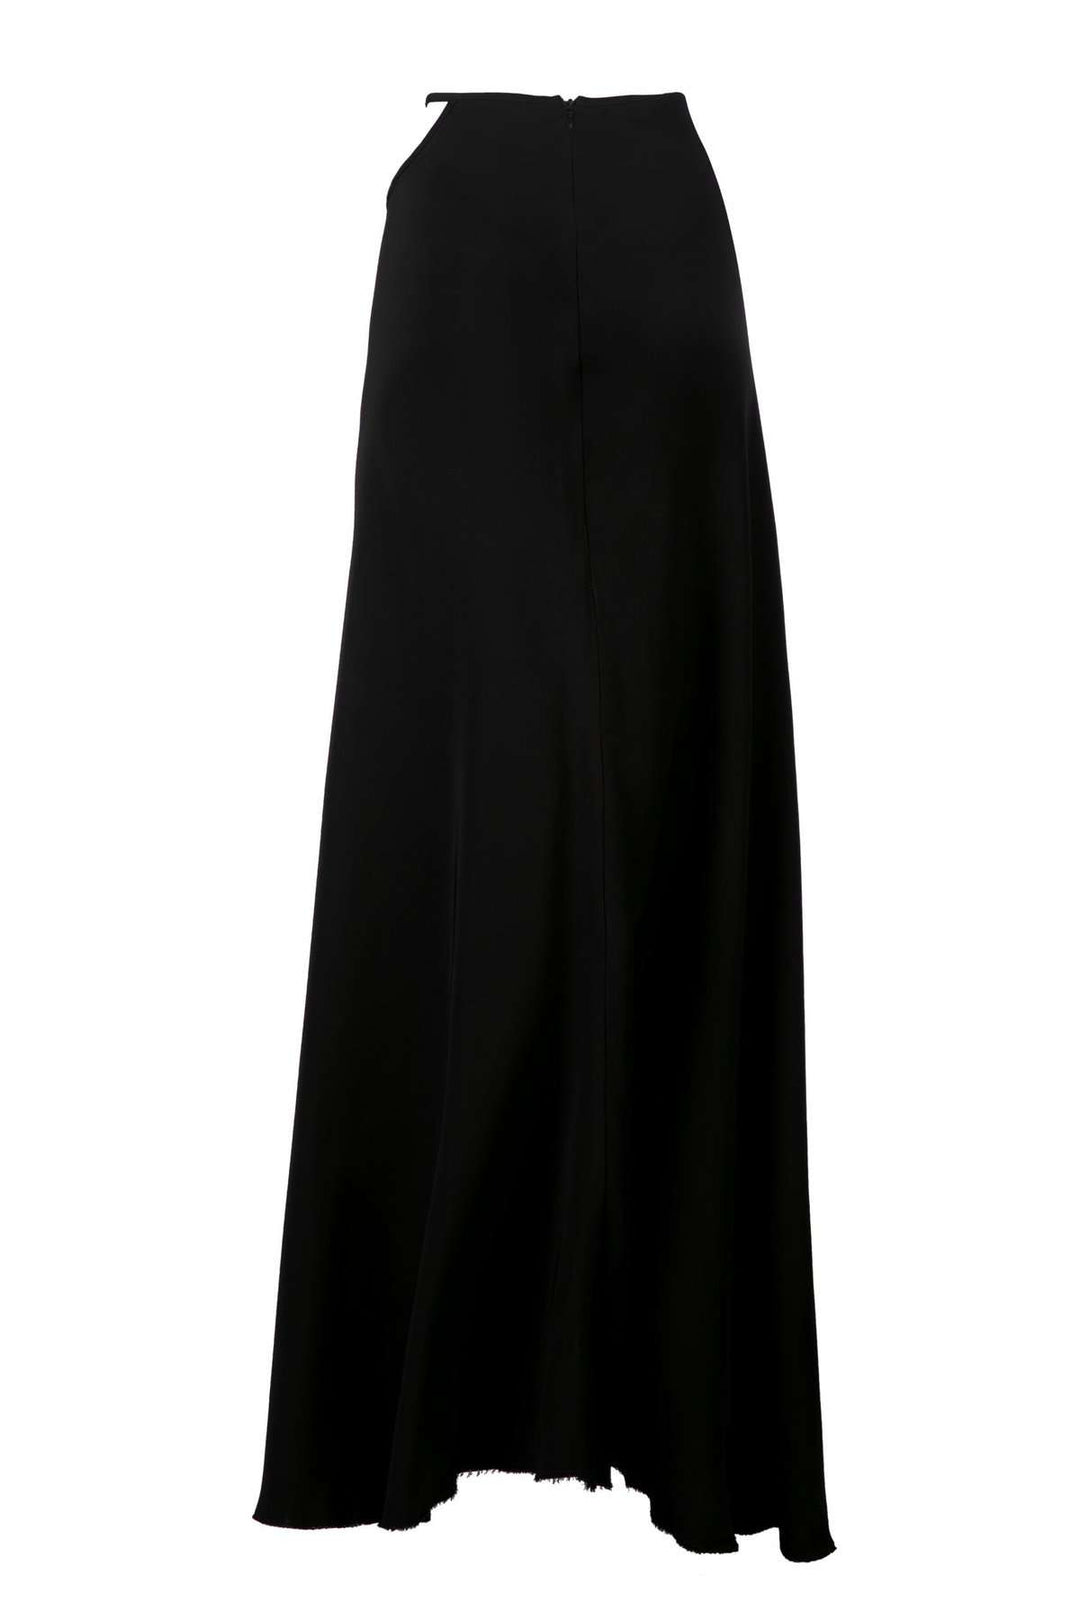 The Clasp Skirt in Black